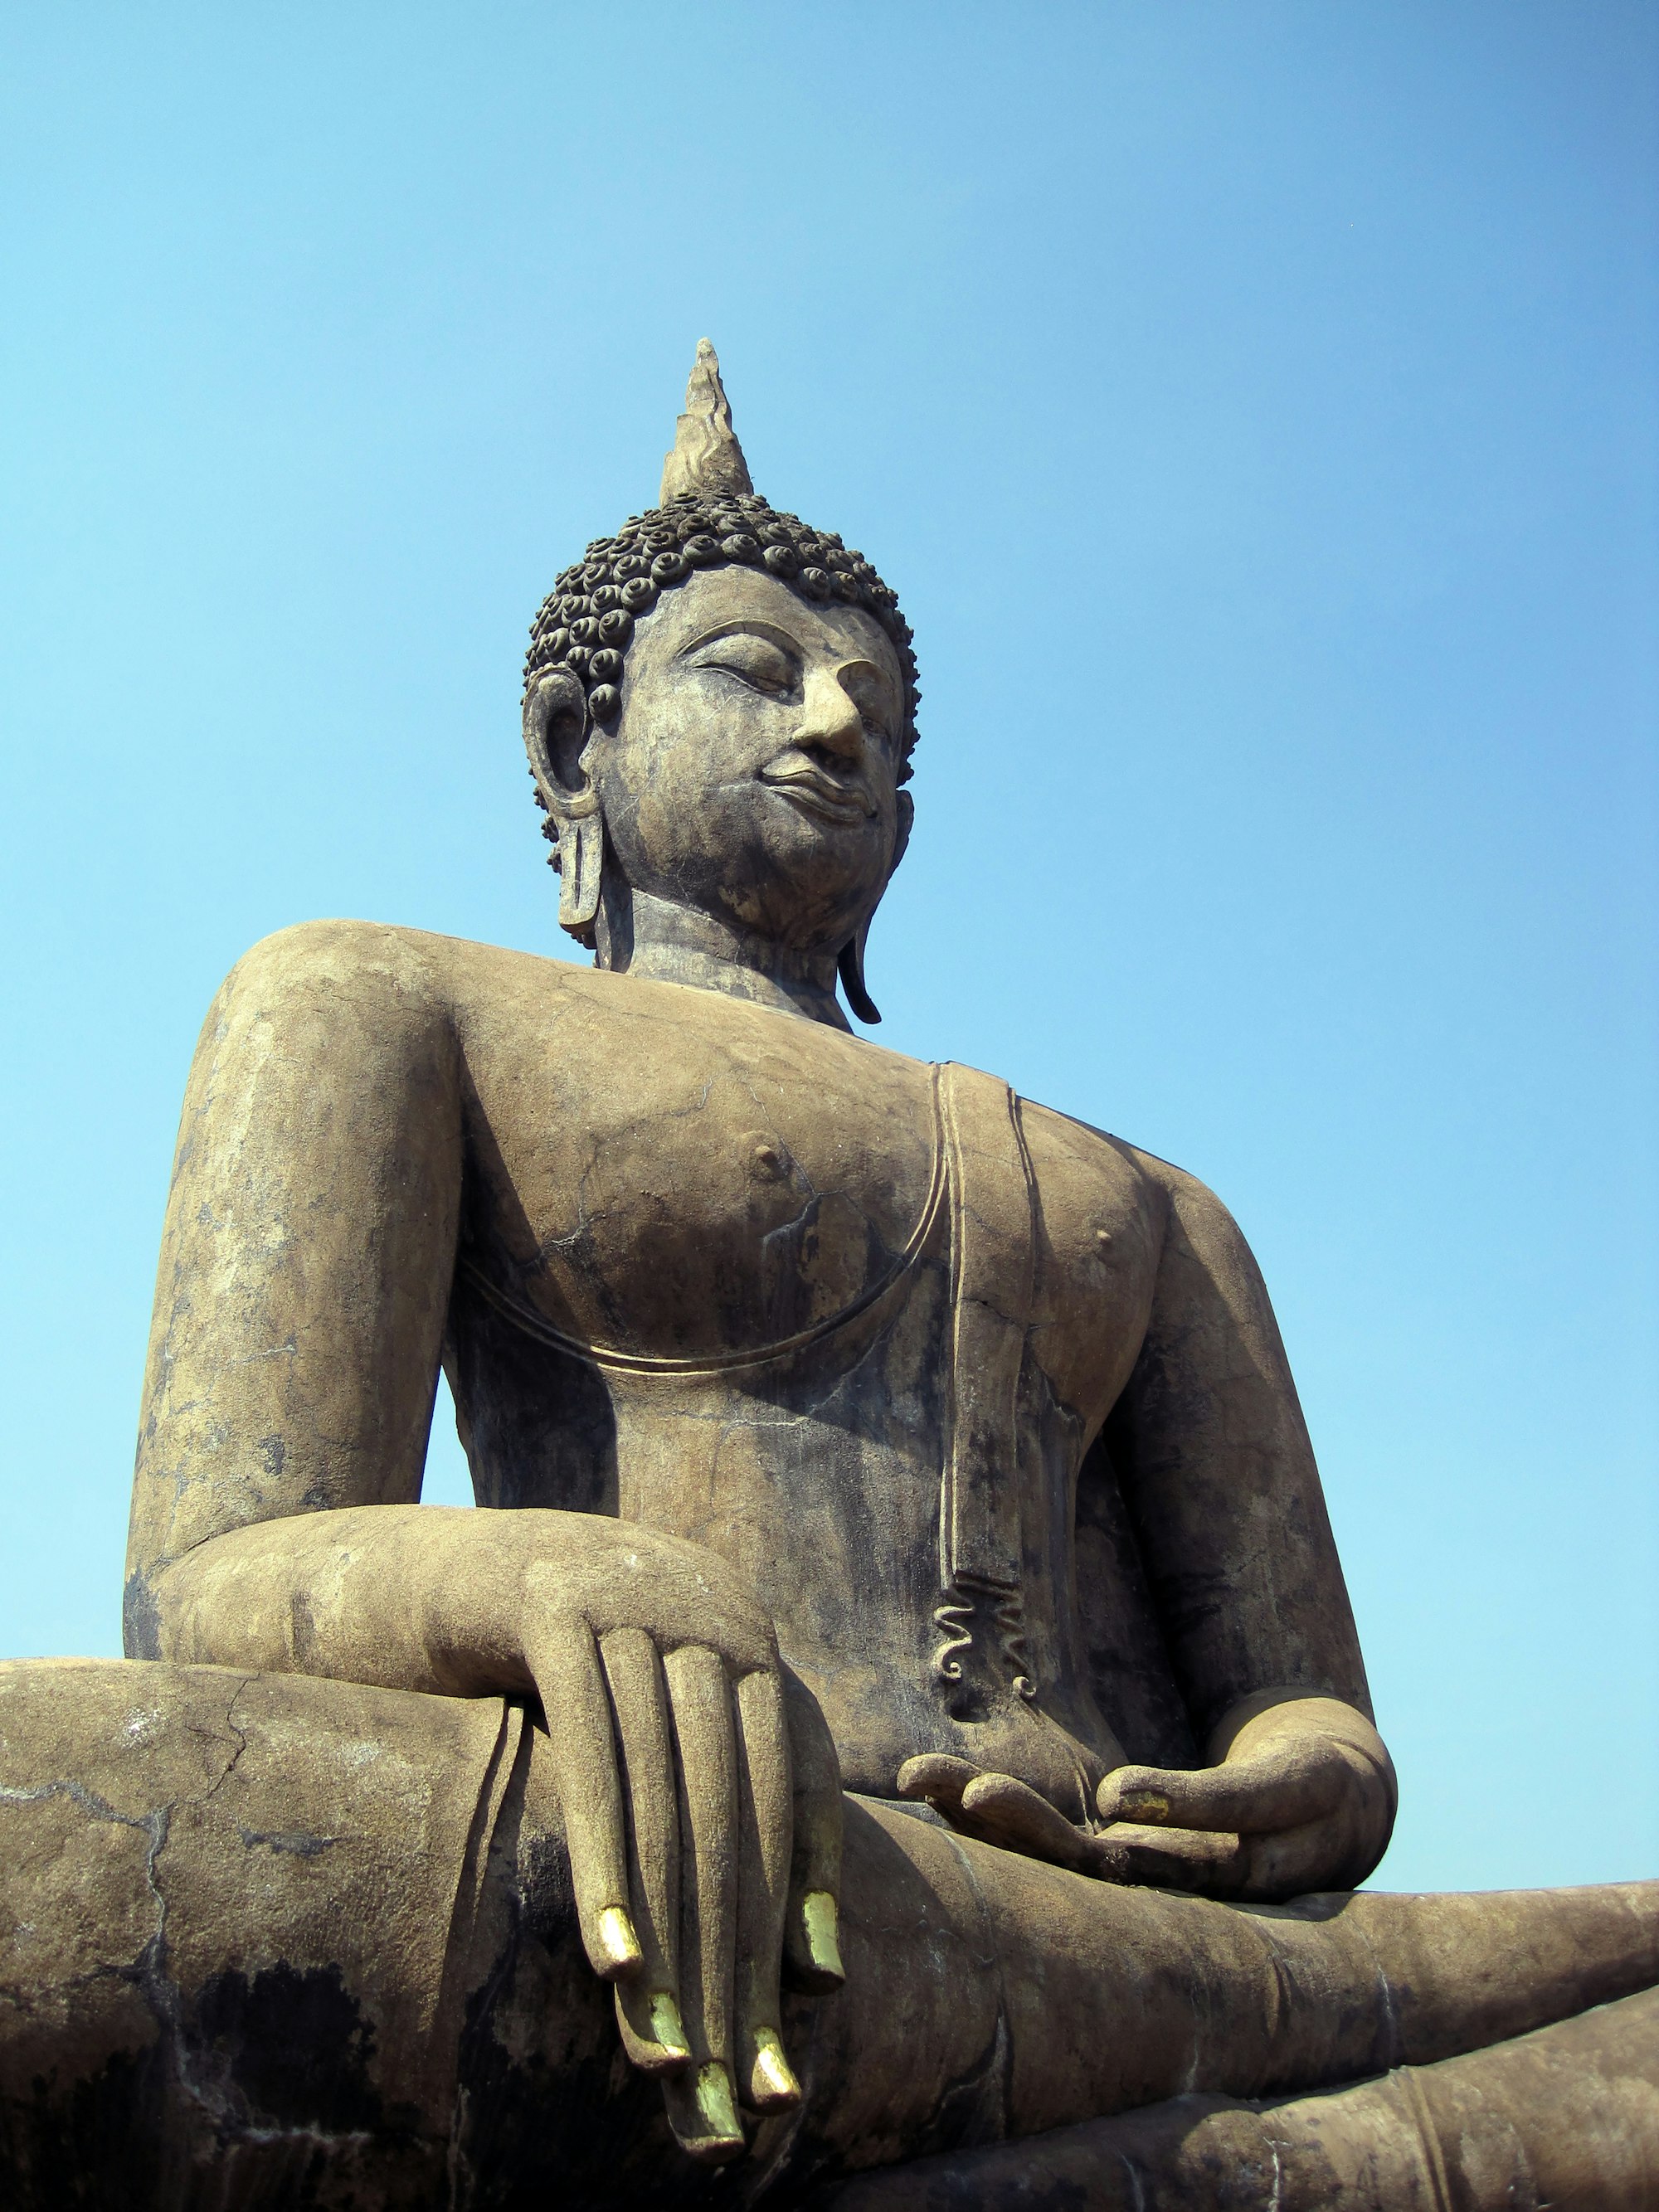 A large statue of the Buddha sitting in lotus position and showing the Bhumisparsha mudra